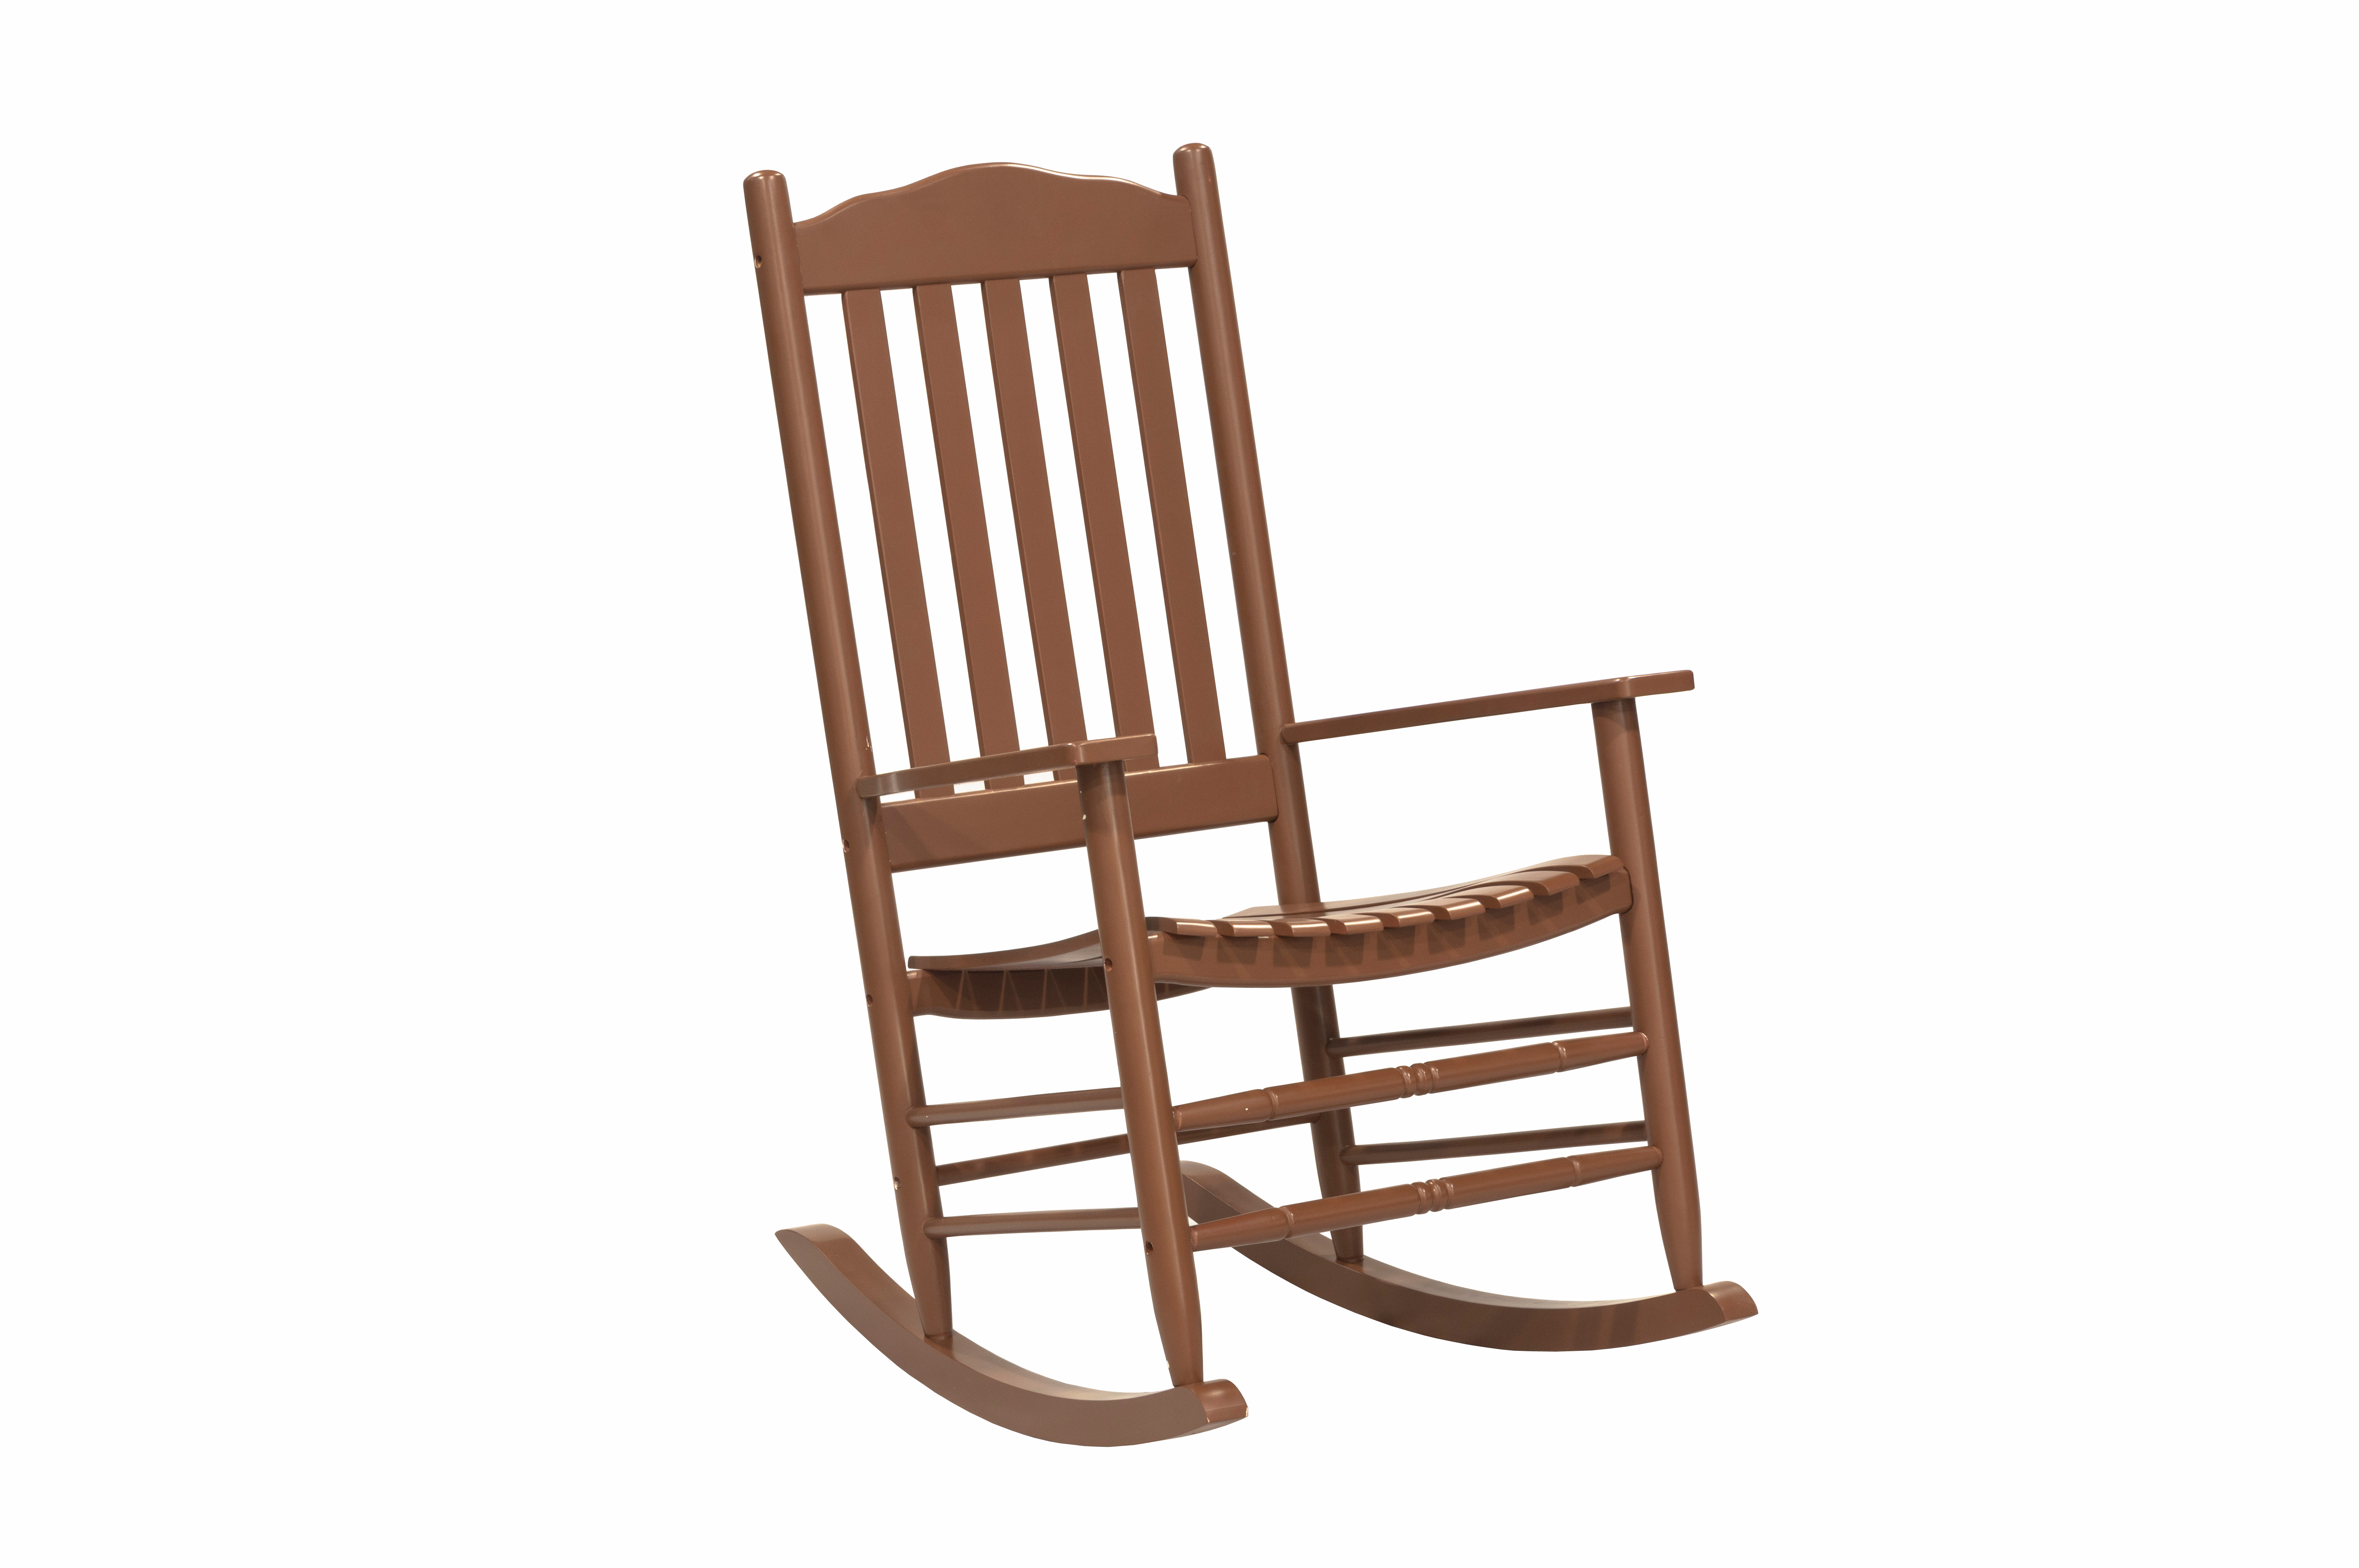 Outdoor Patio Garden Furniture 3-Piece Wood Porch Rocking Chair Set, Weather Resistant Finish,2 Rocking Chairs and 1 Side Table-Brown - image 5 of 11